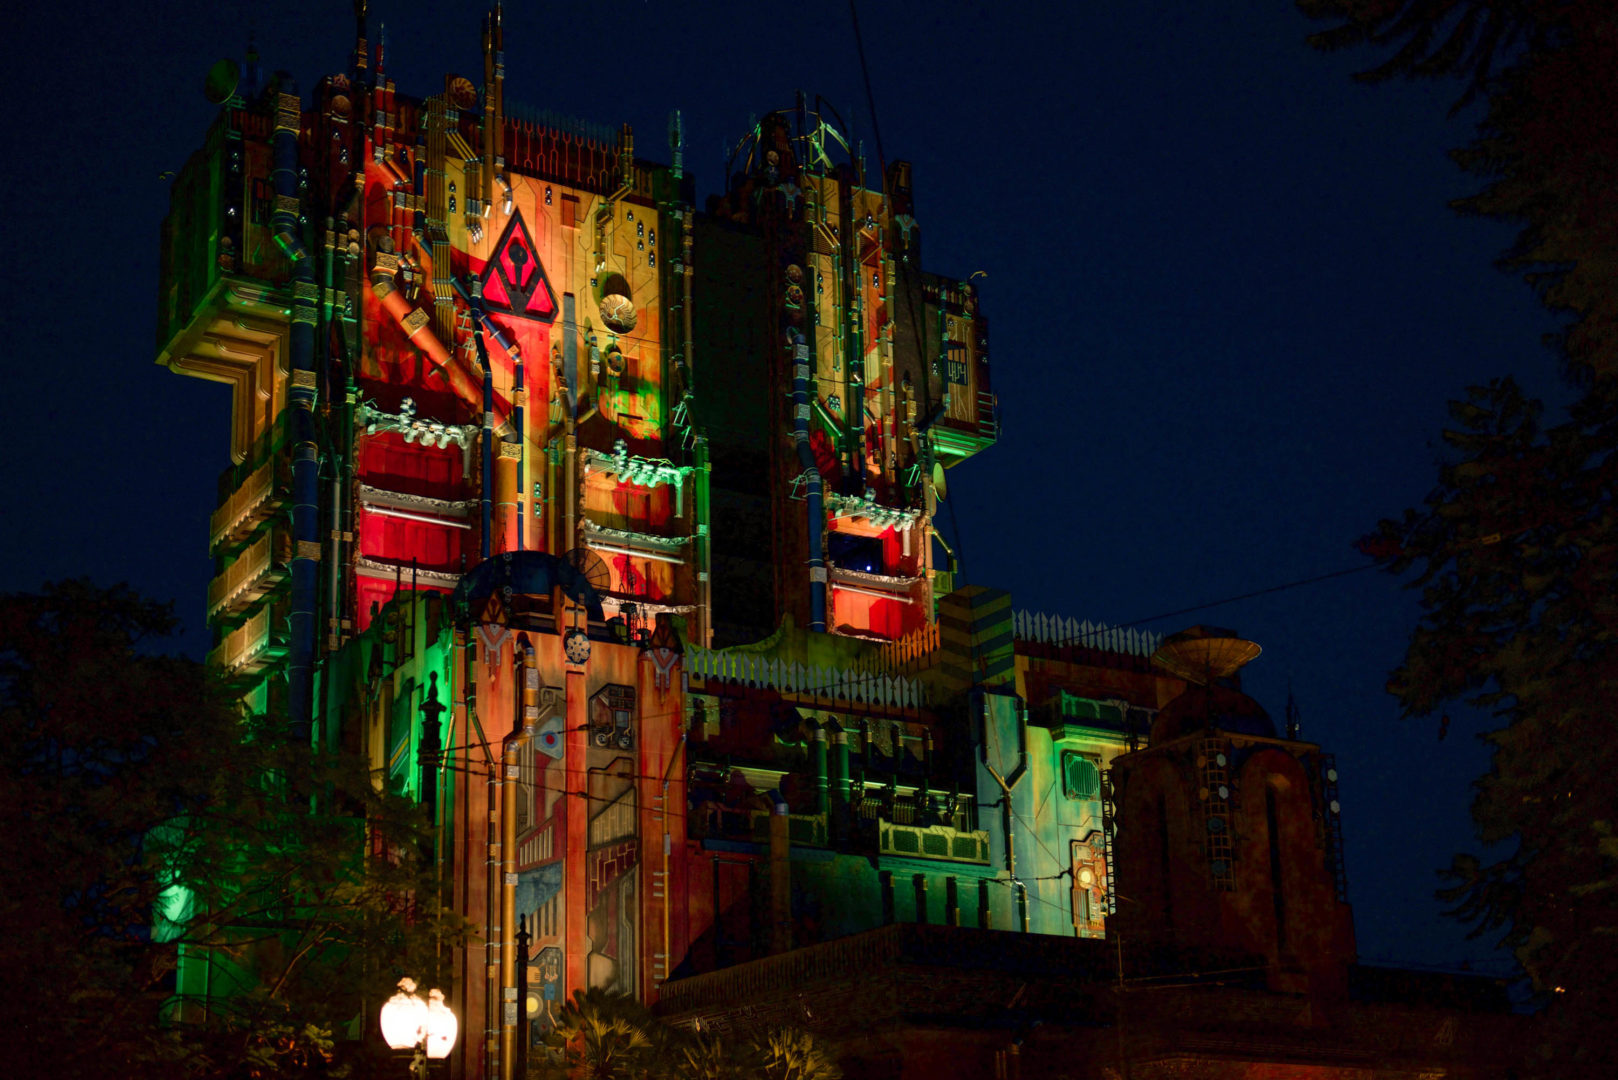 Guardians of Galaxy Mission Breakout Ride at Disneyland's California Adventure